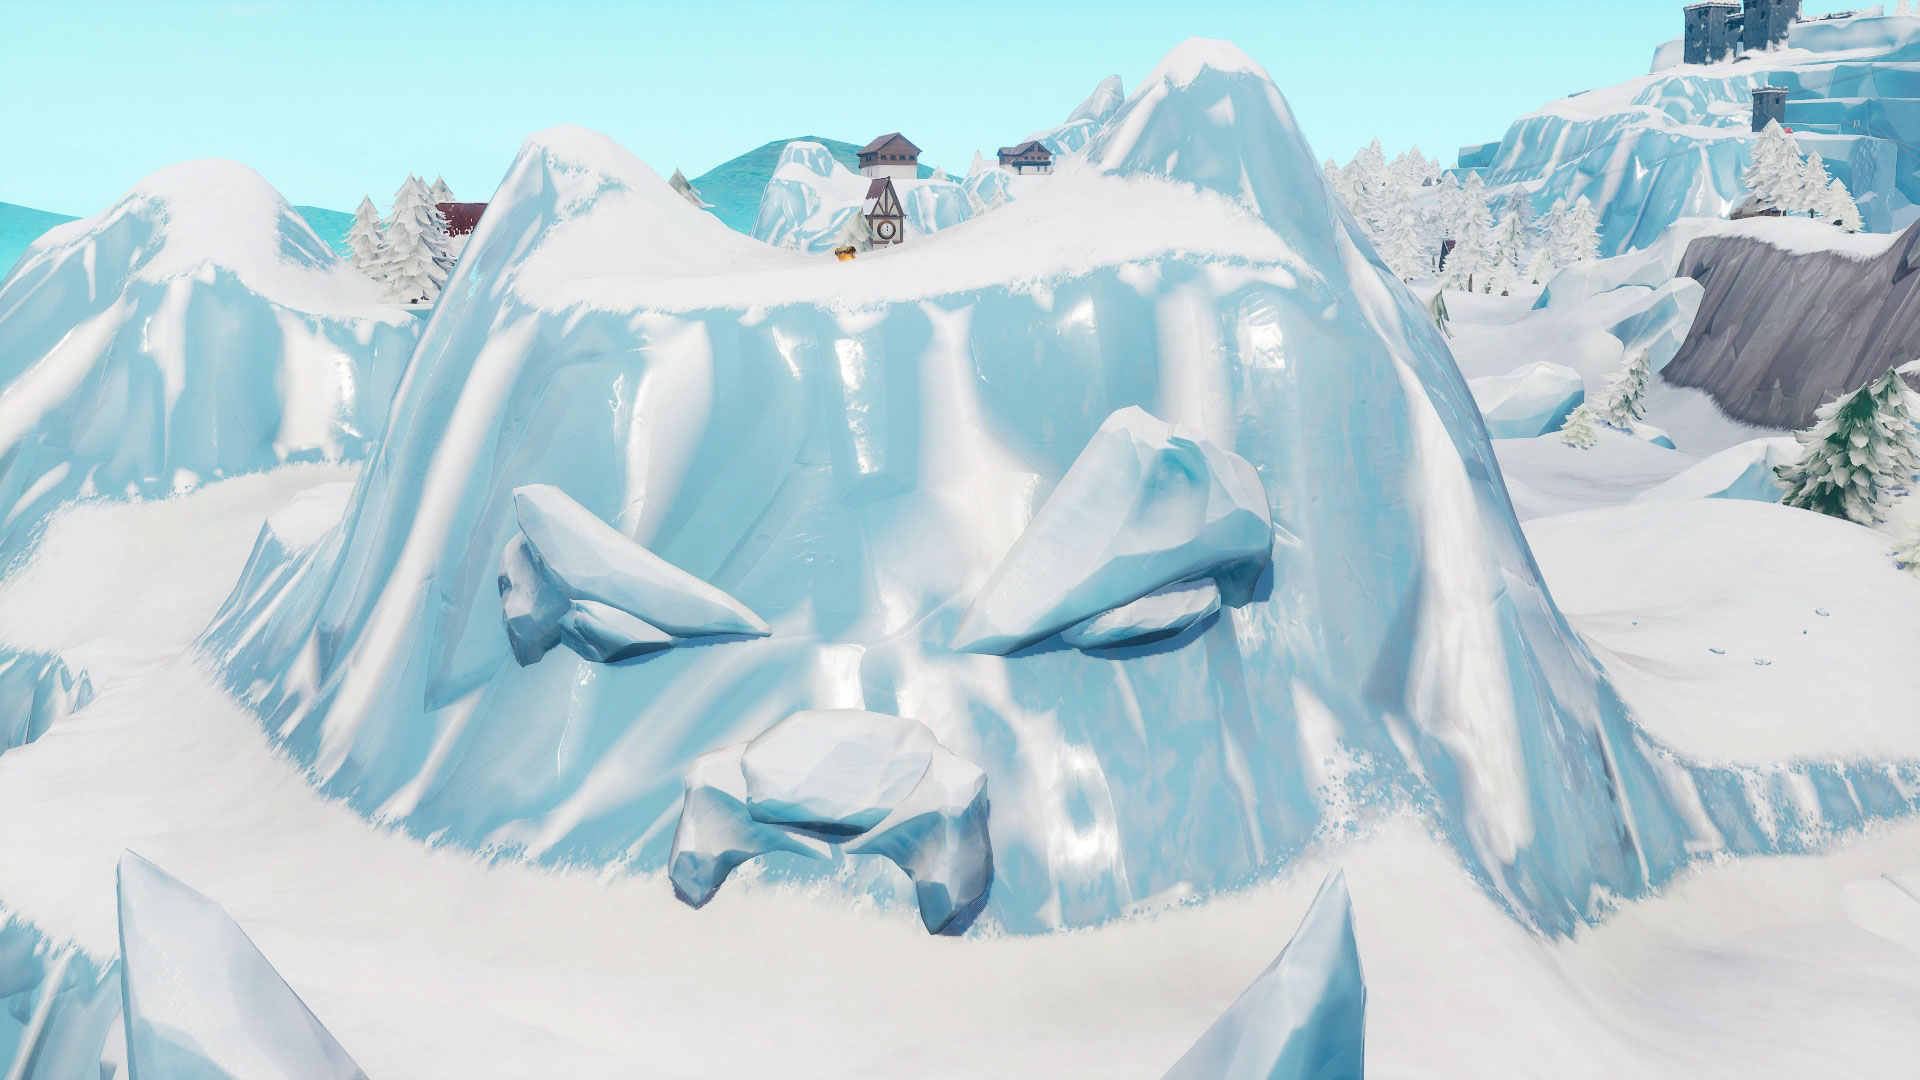 where to visit a giant face in the desert the jungle and the snow in fortnite season 8 week 1 challenge gamesradar - all giant faces in fortnite battle royale